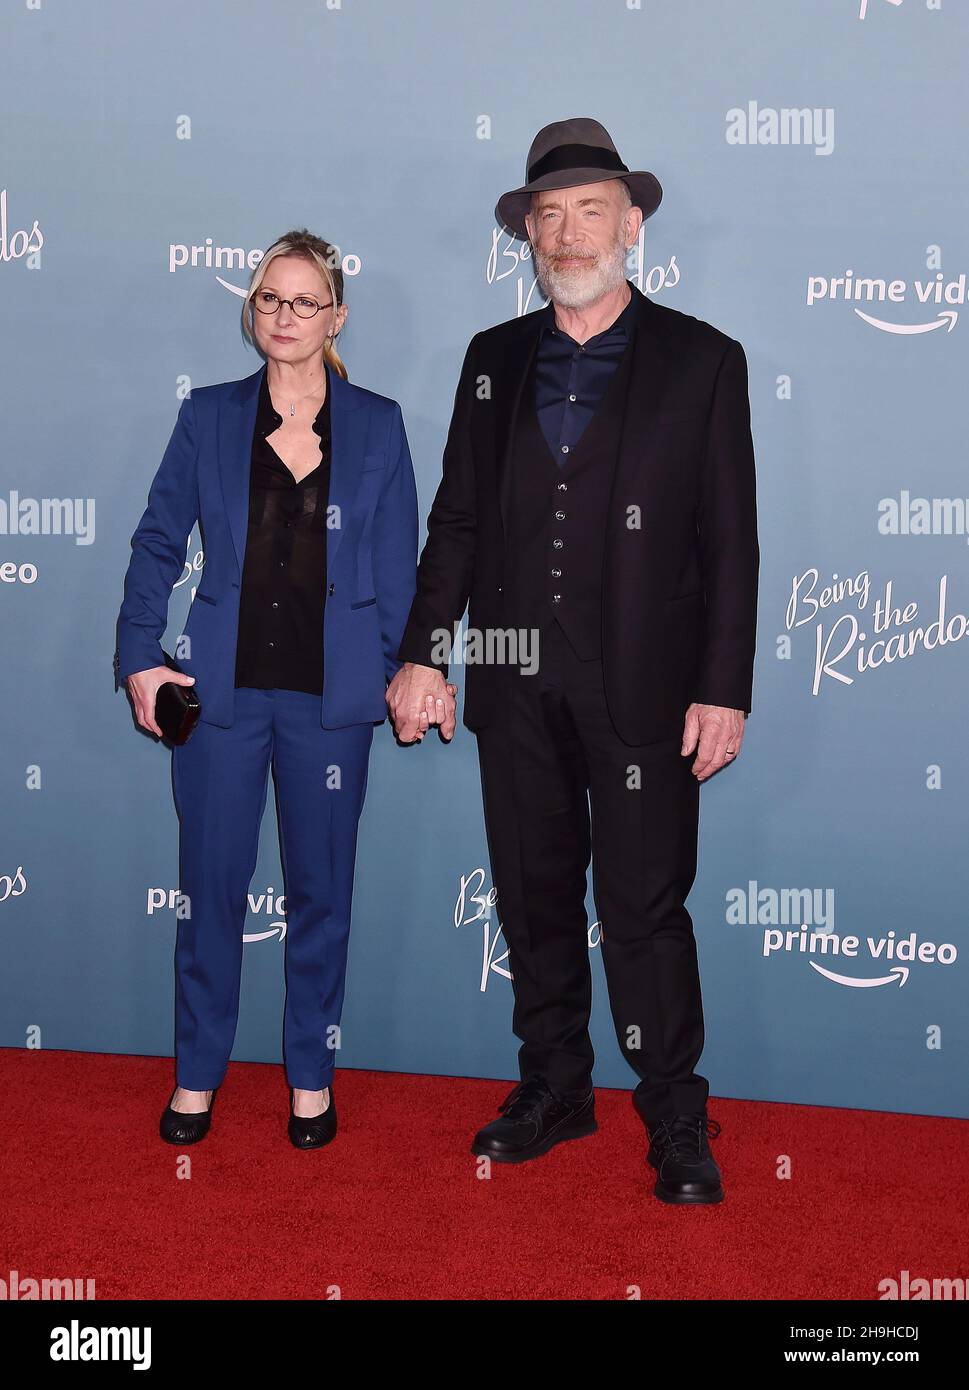 LOS ANGELES, CA - DECEMBER 06: (L-R) Michelle Schumacher and J.K. Simmons  attends the Los Angeles Premiere Of Amazon Studios' 